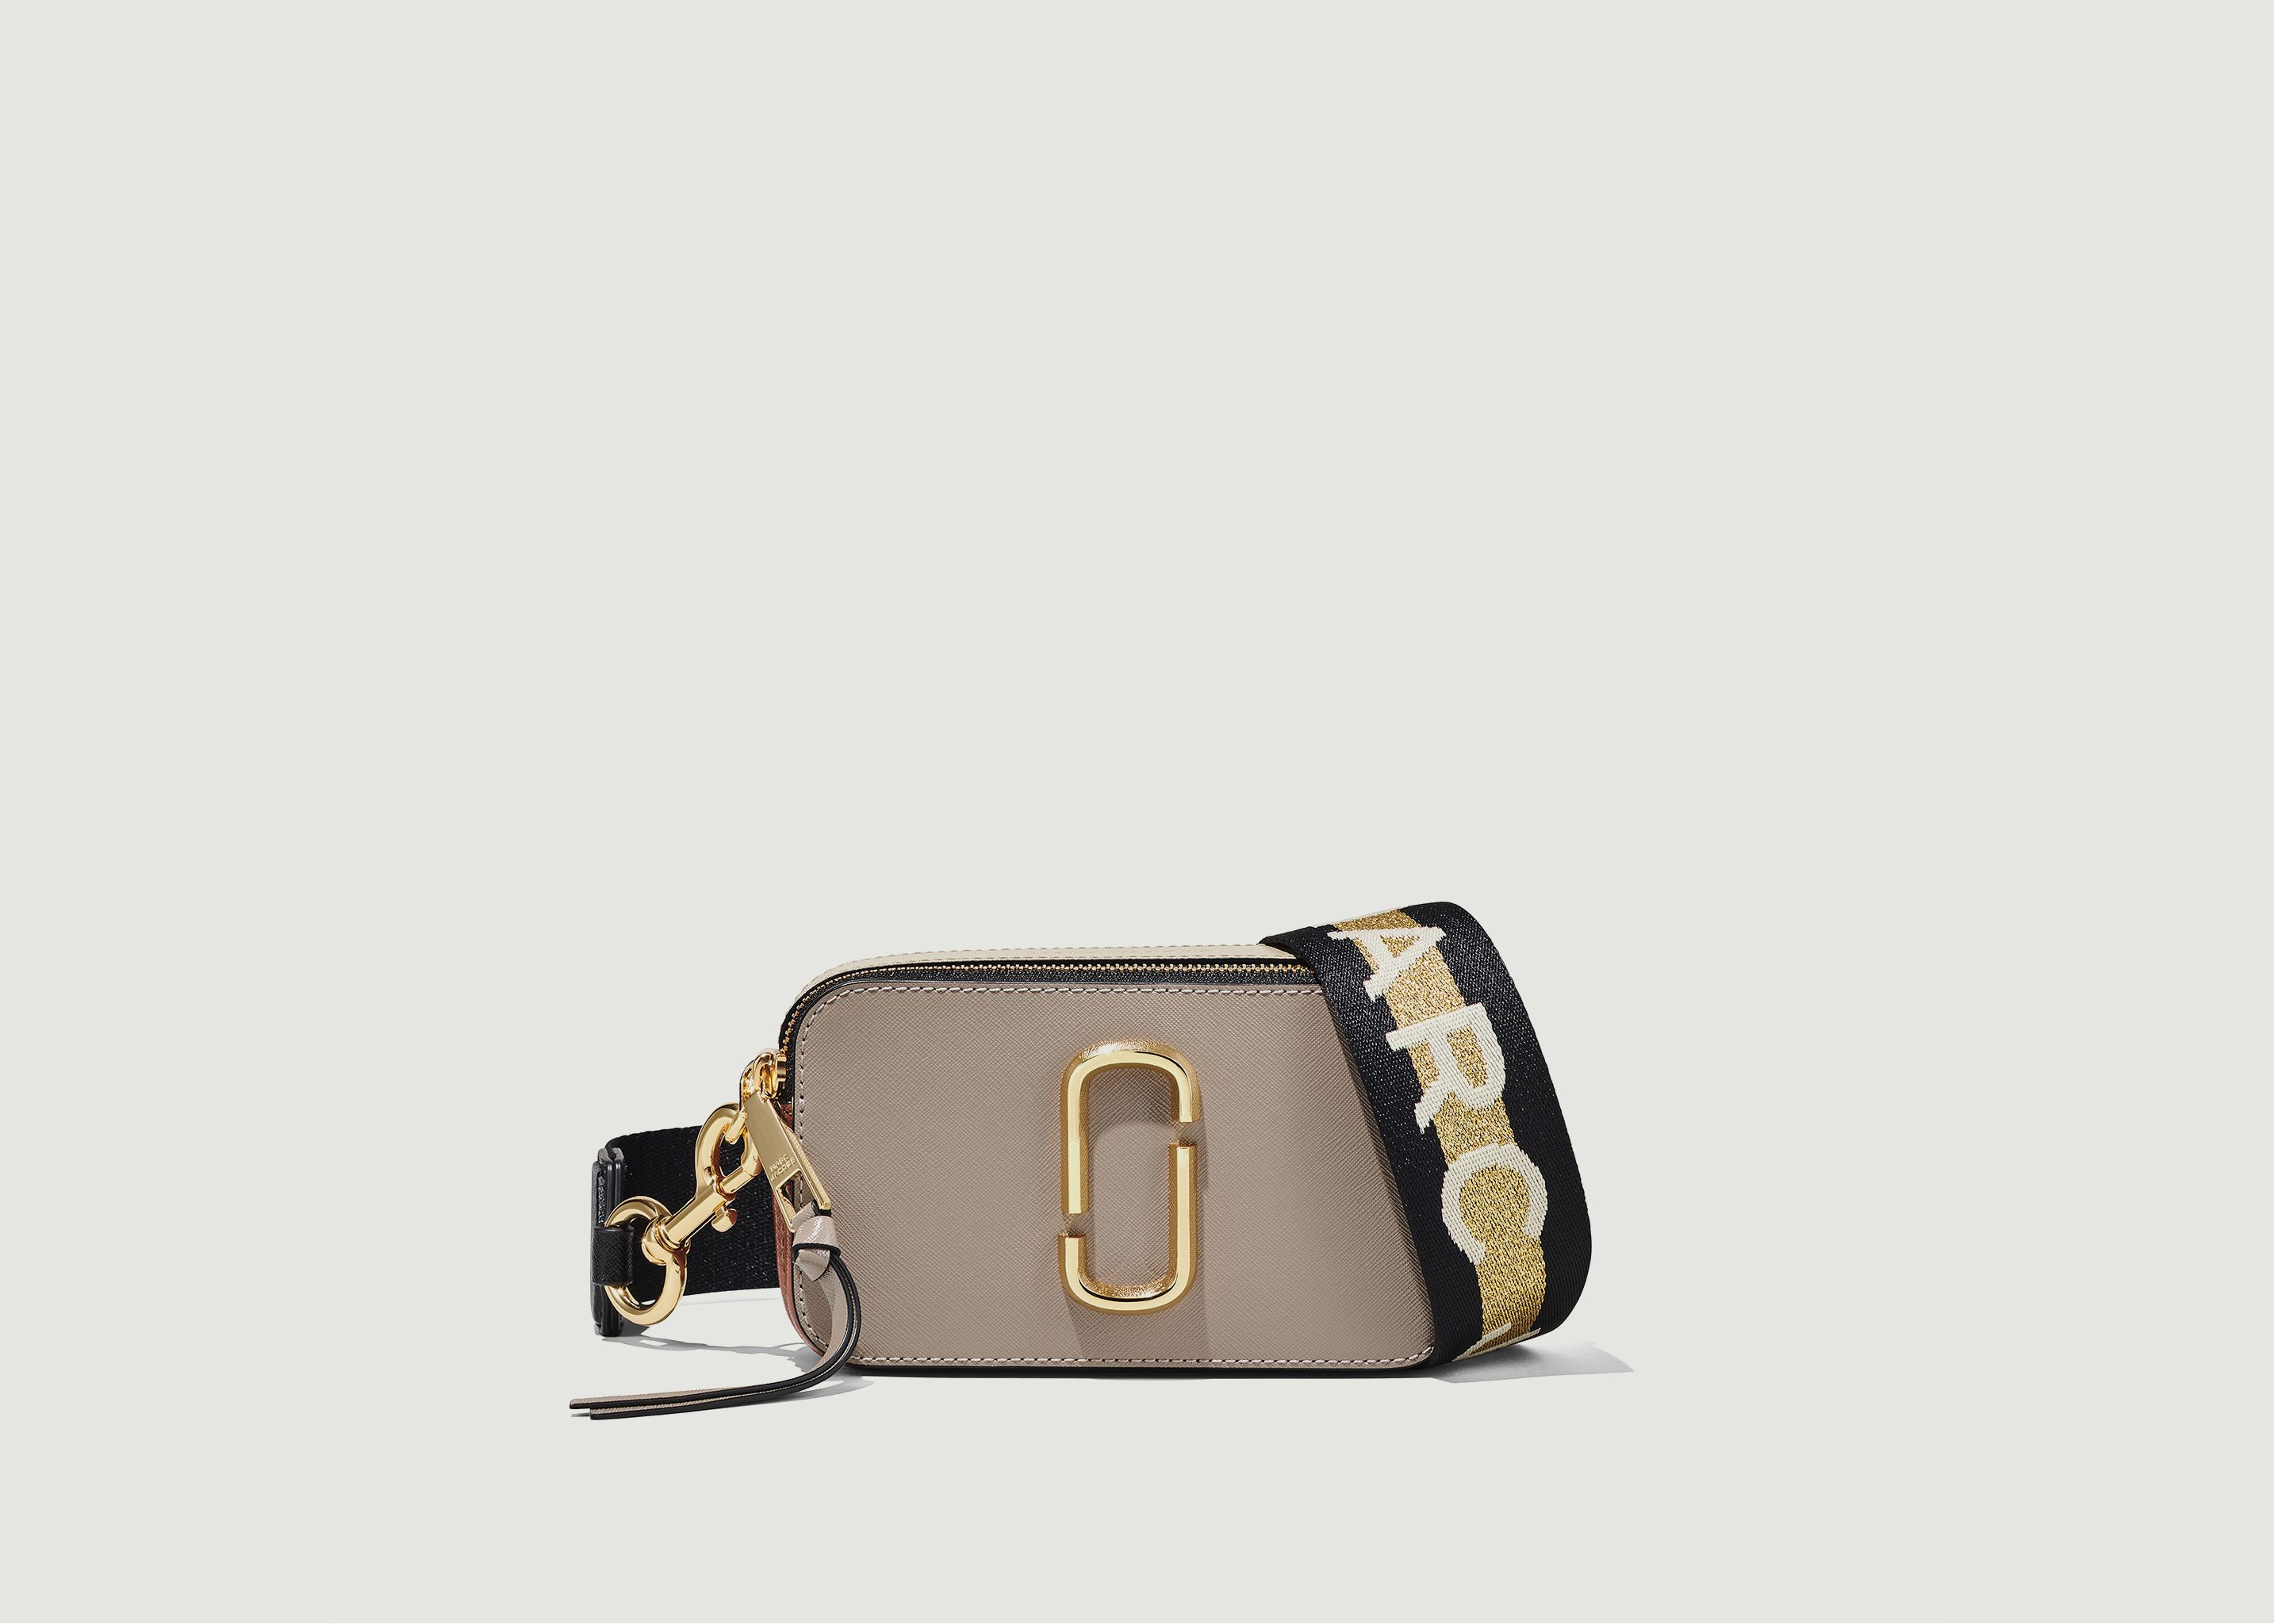 MARC JACOBS MARC JACOBS The Snapshot Painted Saffiano Leather